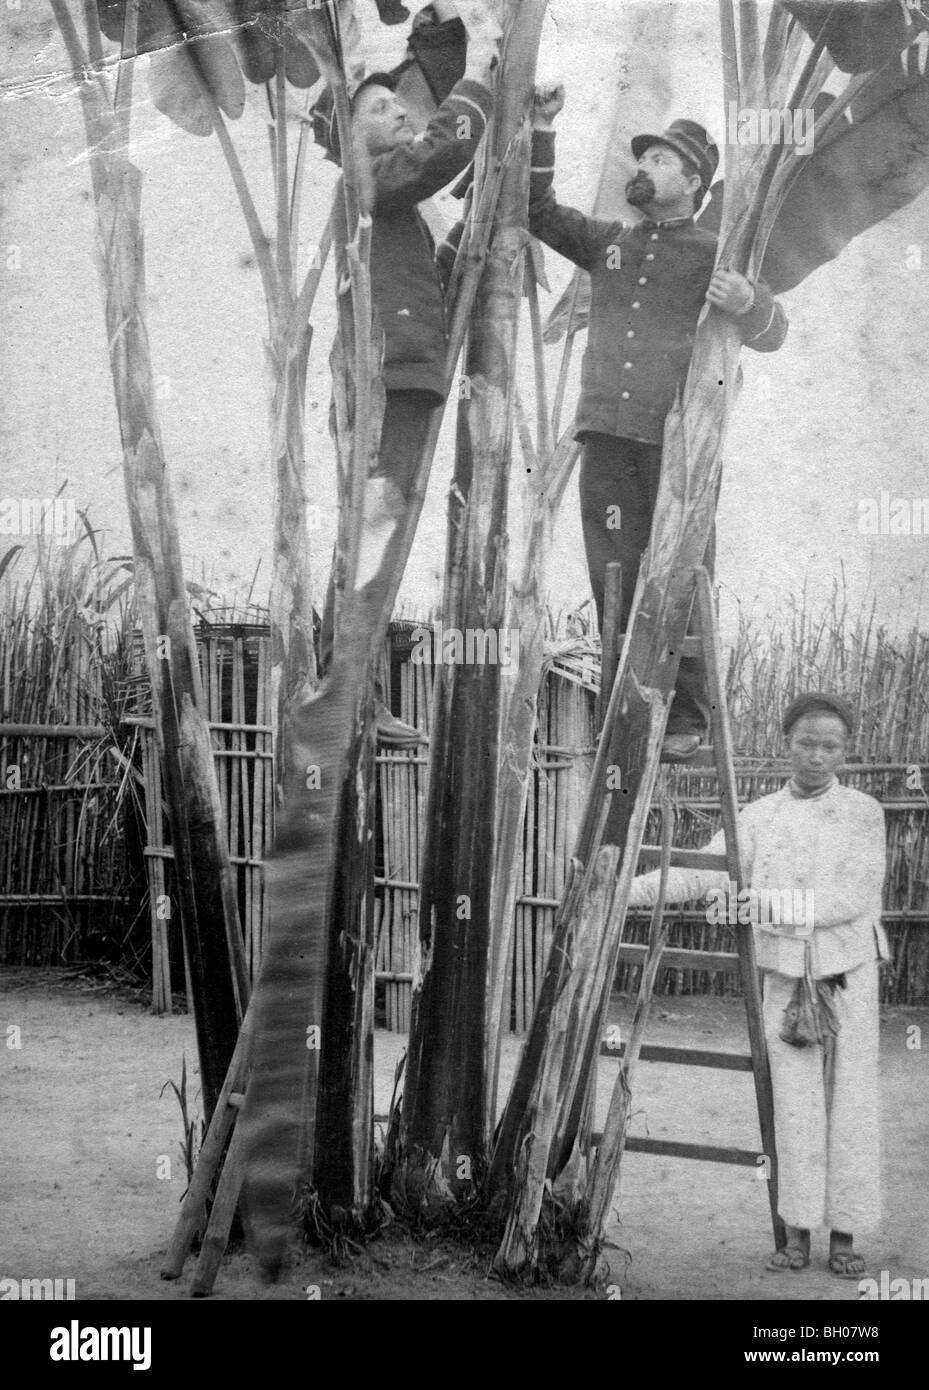 Two French soldiers work with a Vietnamese native holding the ladder for them in Vietnam or Cambodia circa 1900. Stock Photo